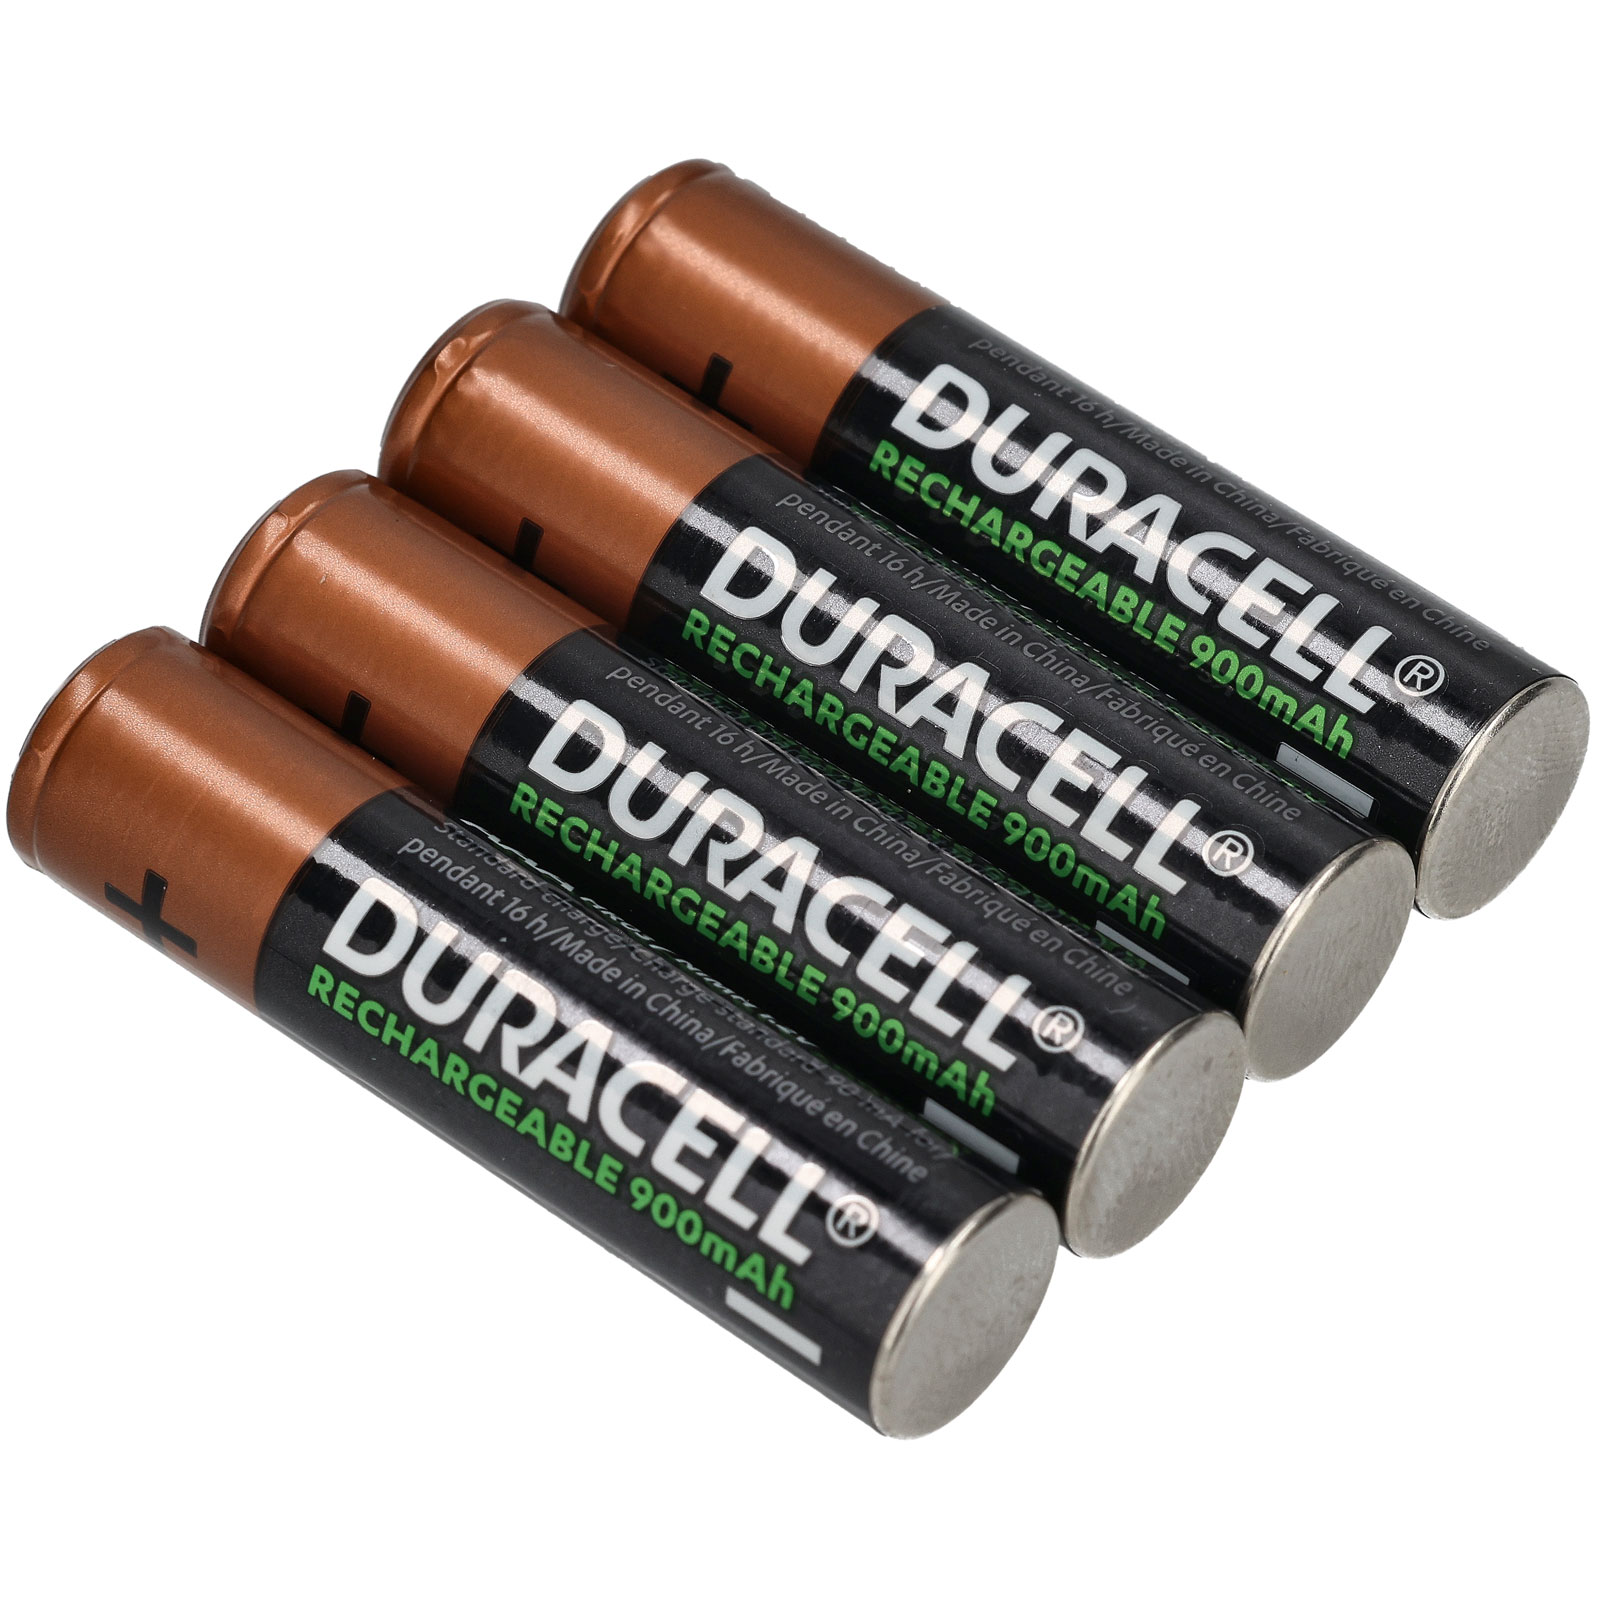 Duracell AAA 900 mAh Rechargeable NiMH Batteries – Torch Direct